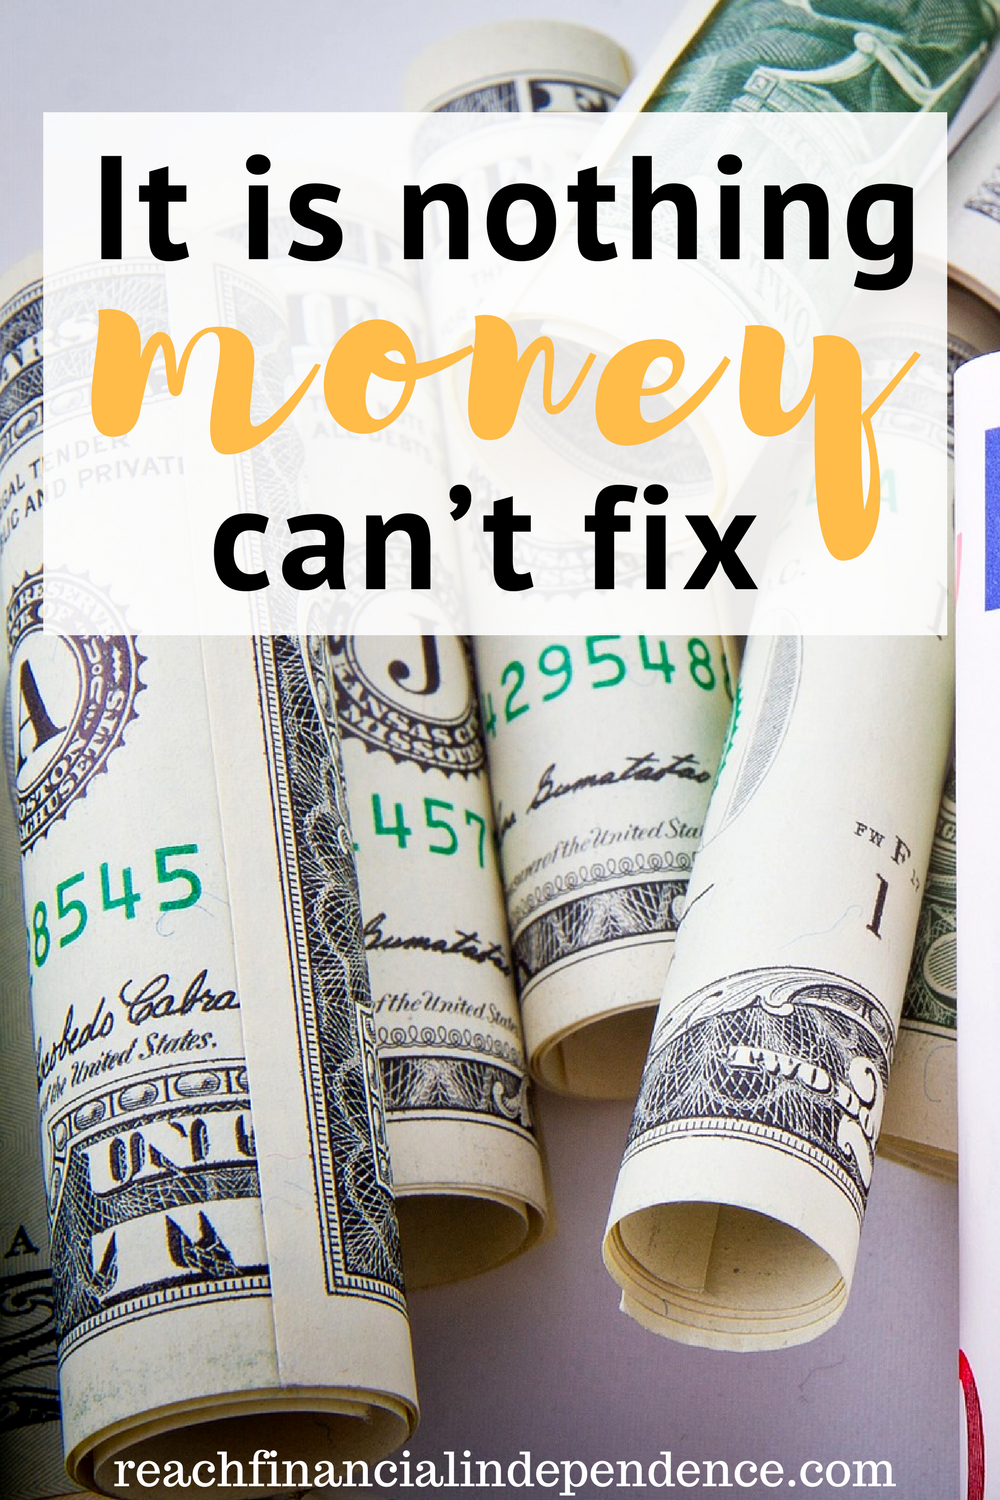 It is nothing money can’t fix. Sometimes a problem arises, it can either be costly or painful, and losing/spending a lot of money is something you can recover from easily.